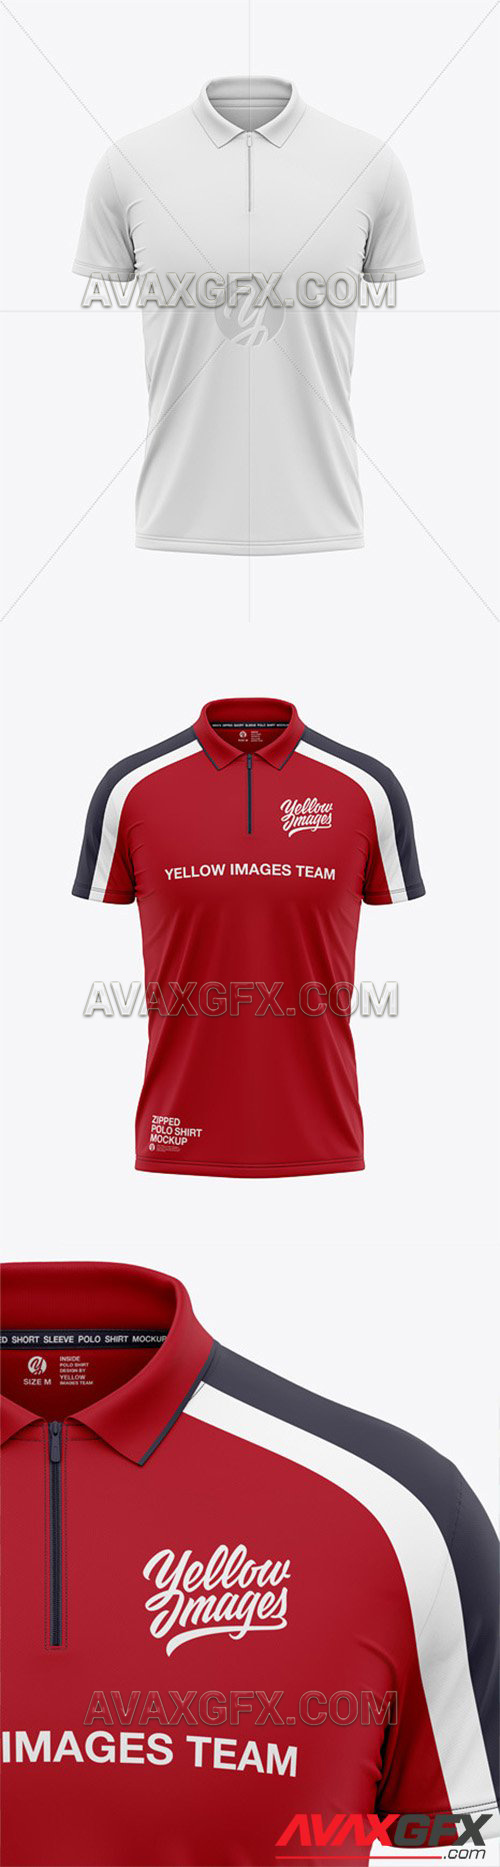 Men S Zip Neck Polo Shirts Mockup Front Half Side View 58400 Avaxgfx All Downloads That You Need In One Place Graphic From Nitroflare Rapidgator